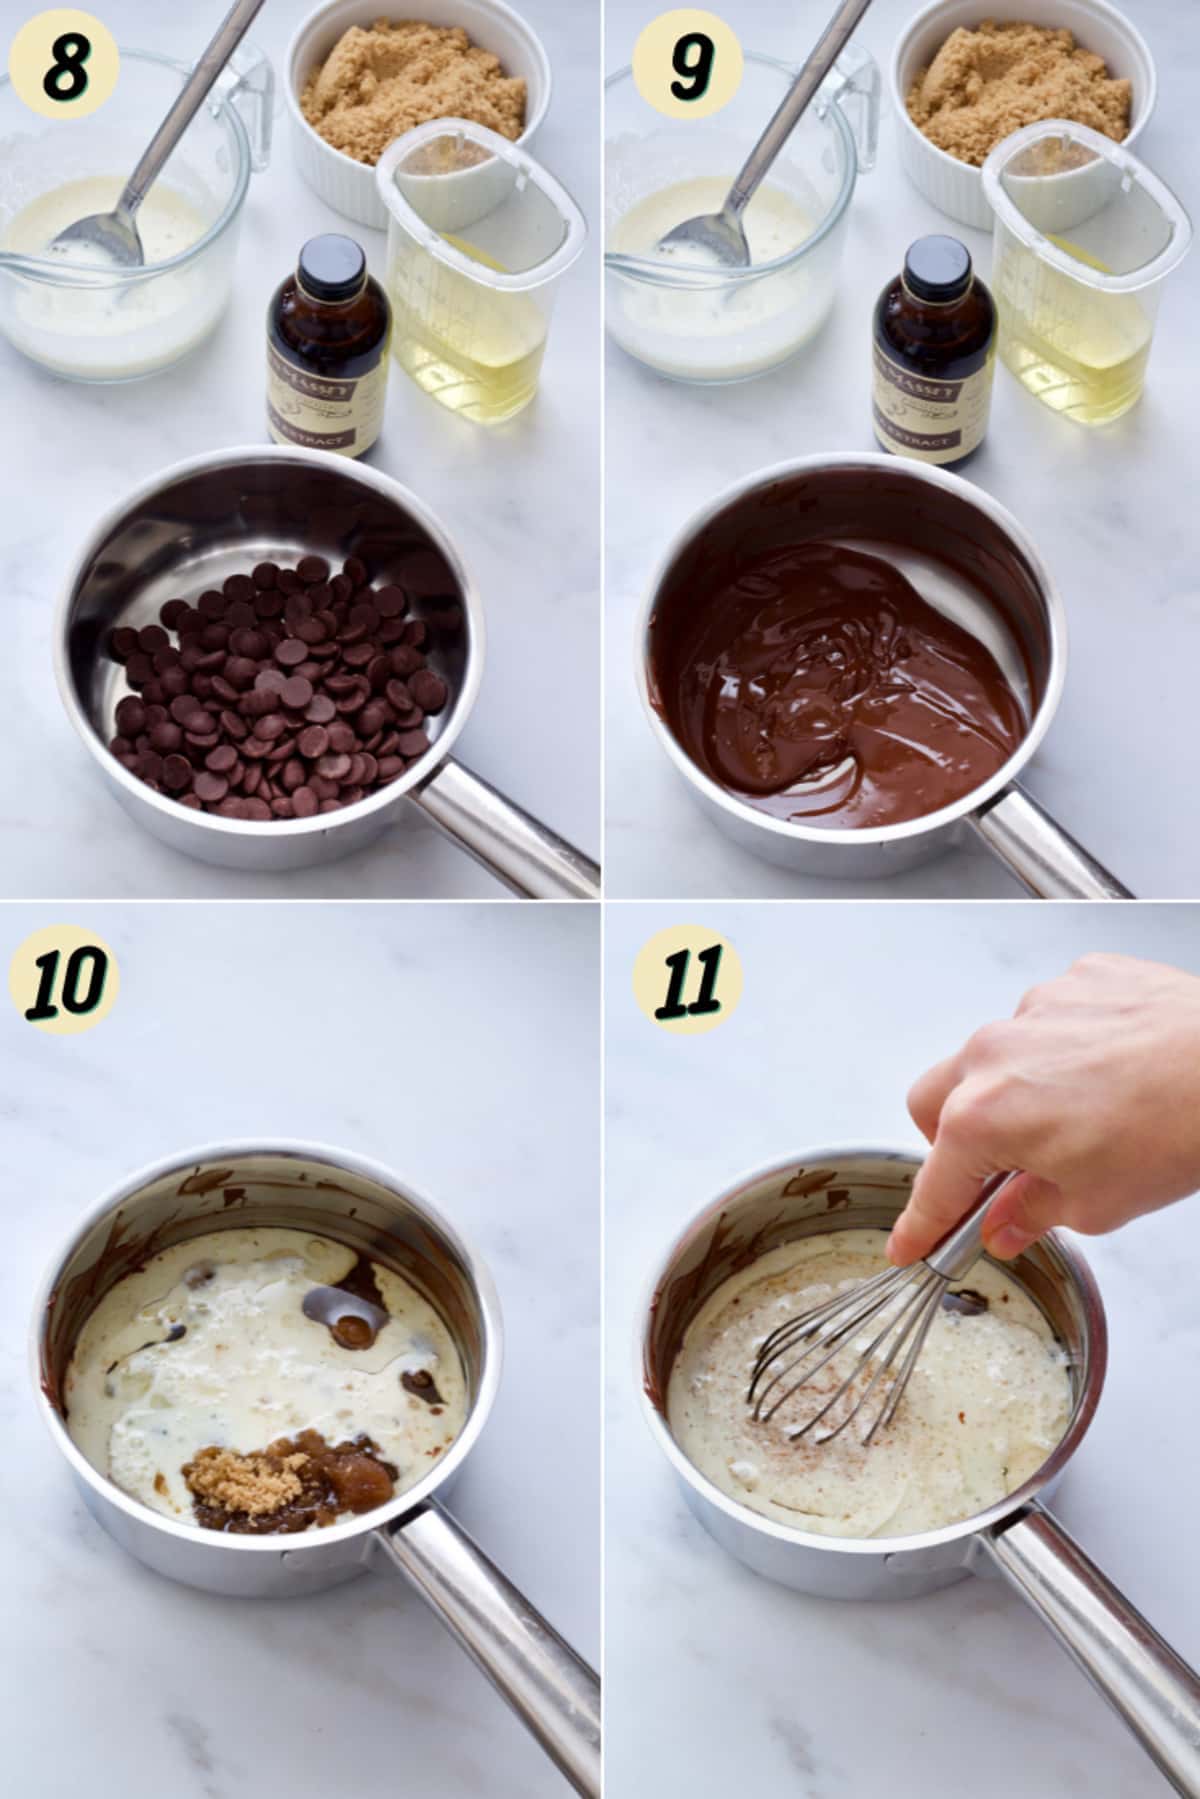 Melted chocolate being mixed with other wet ingredients.